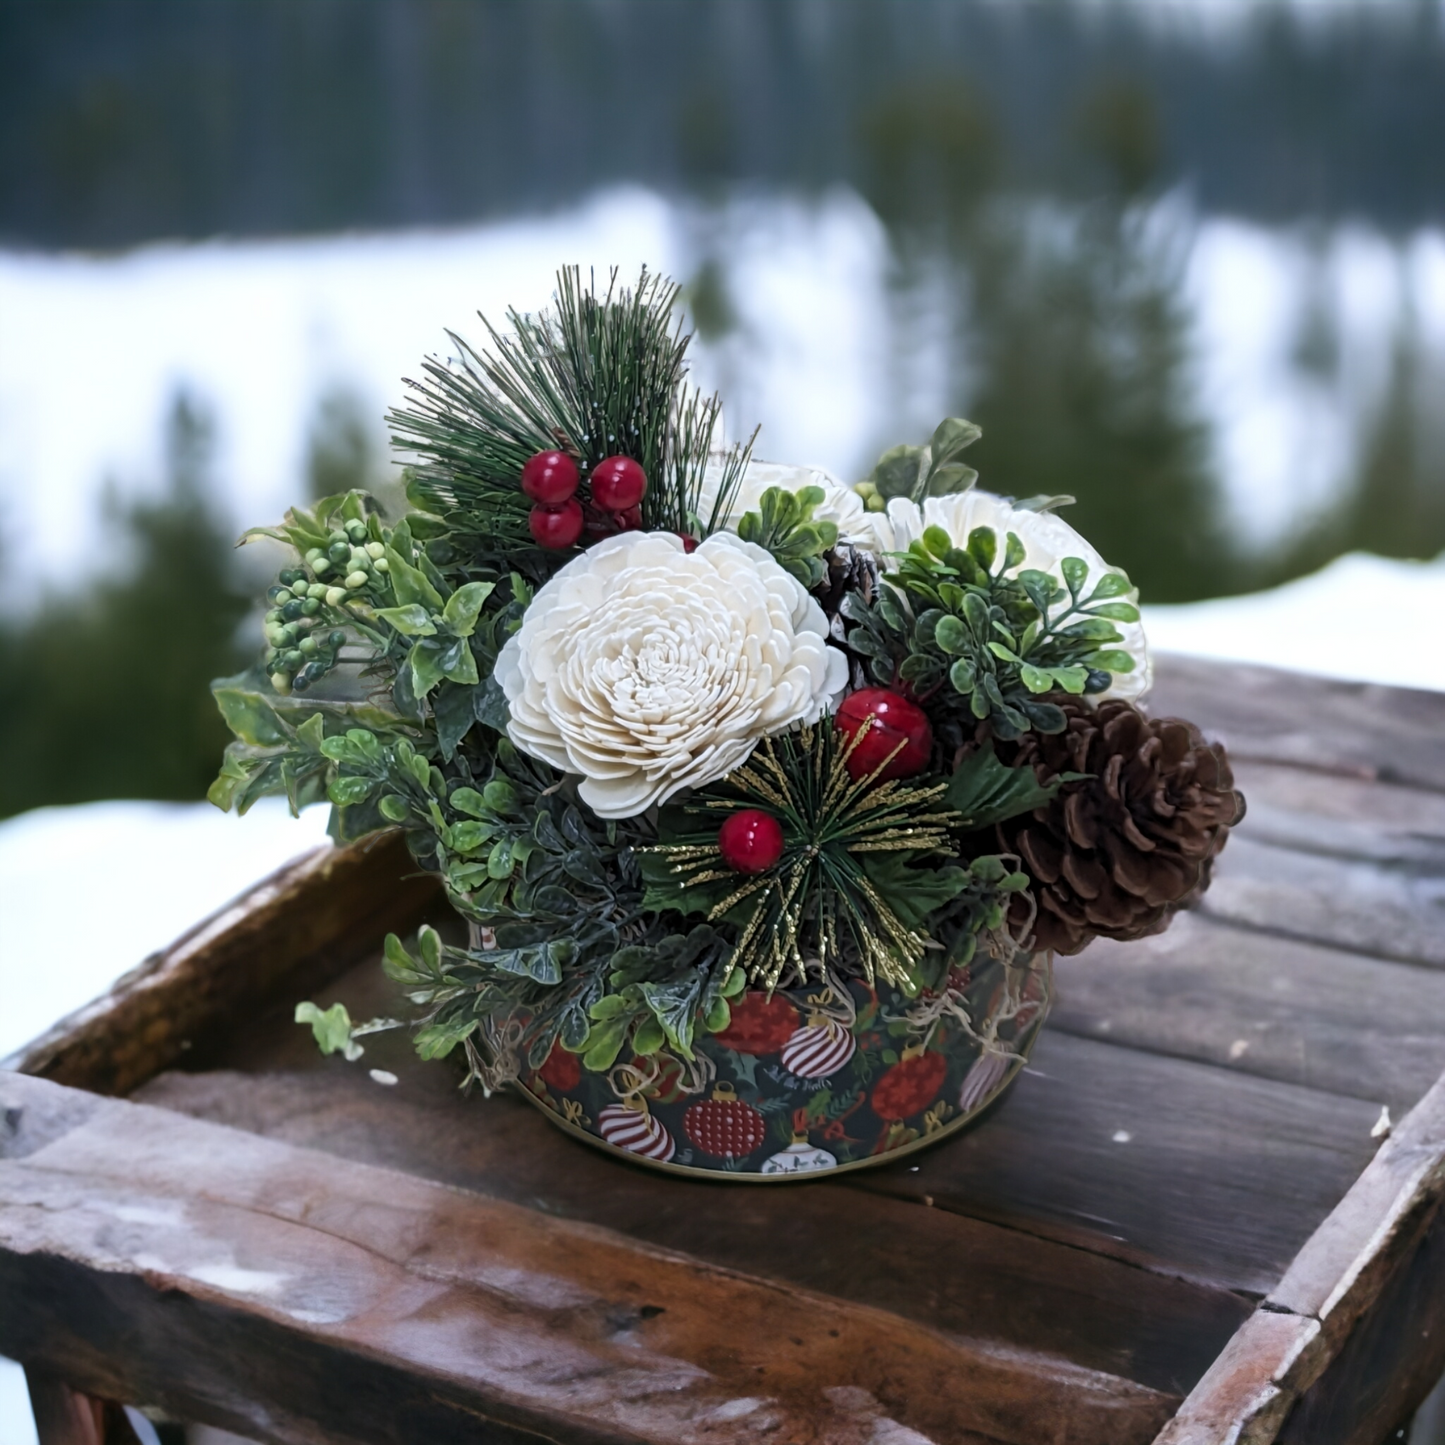 Christmas Arrangements: Bright and Cheery